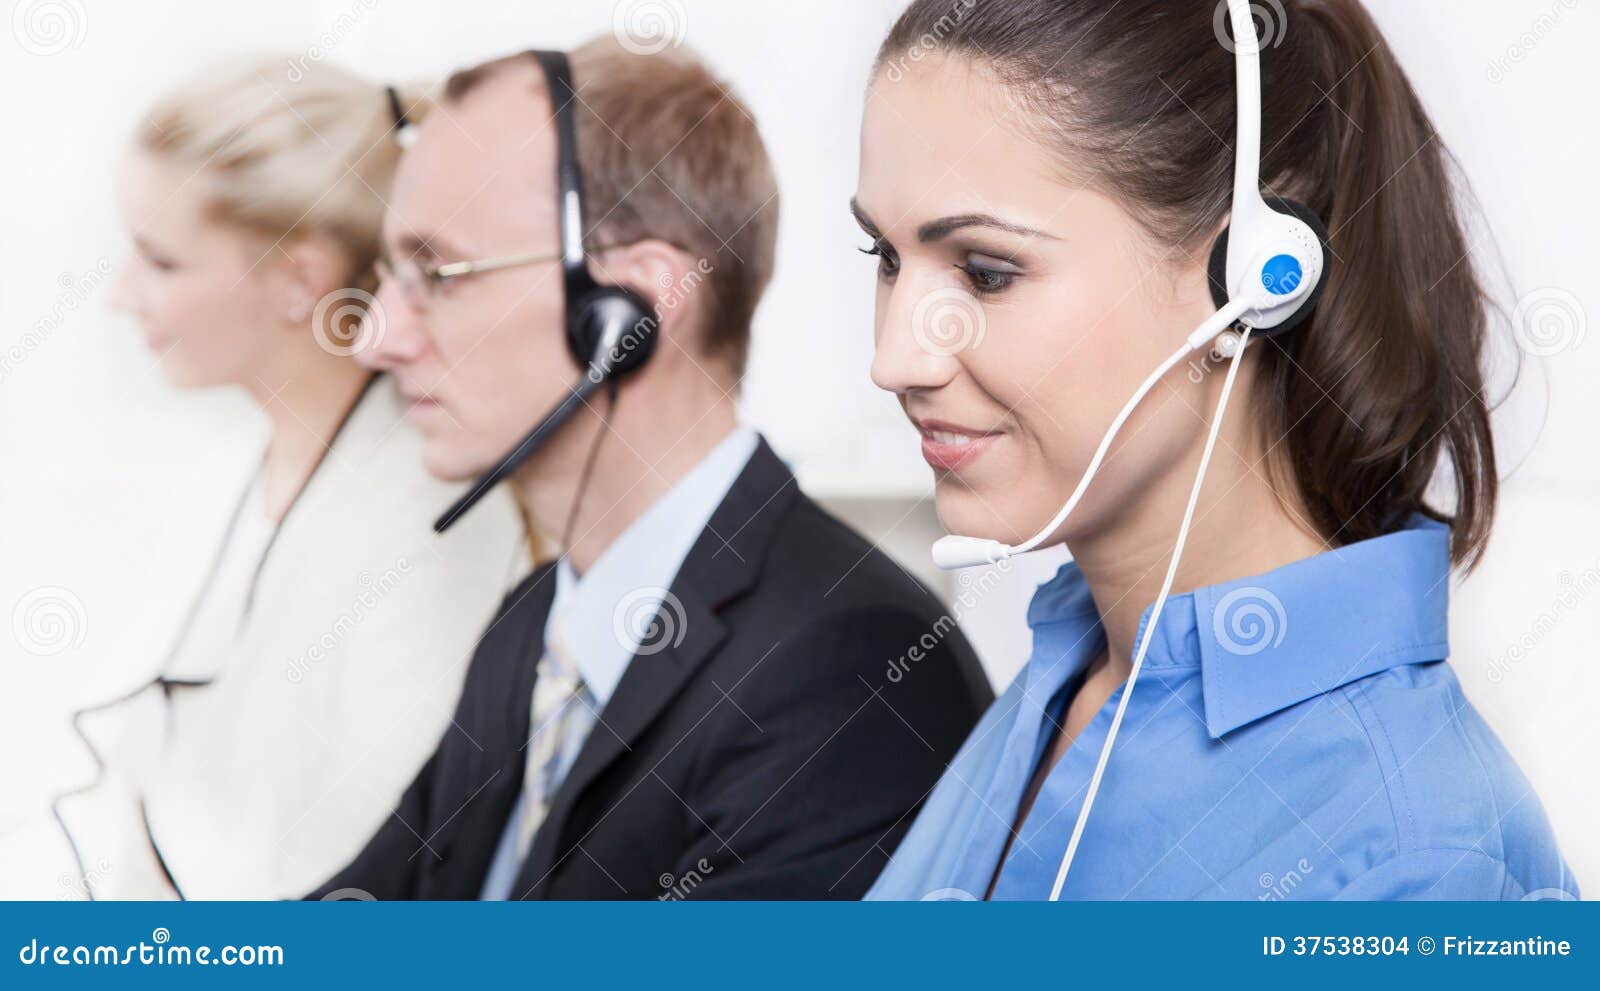 telesales or helpdesk team with headsets - workers at call center.